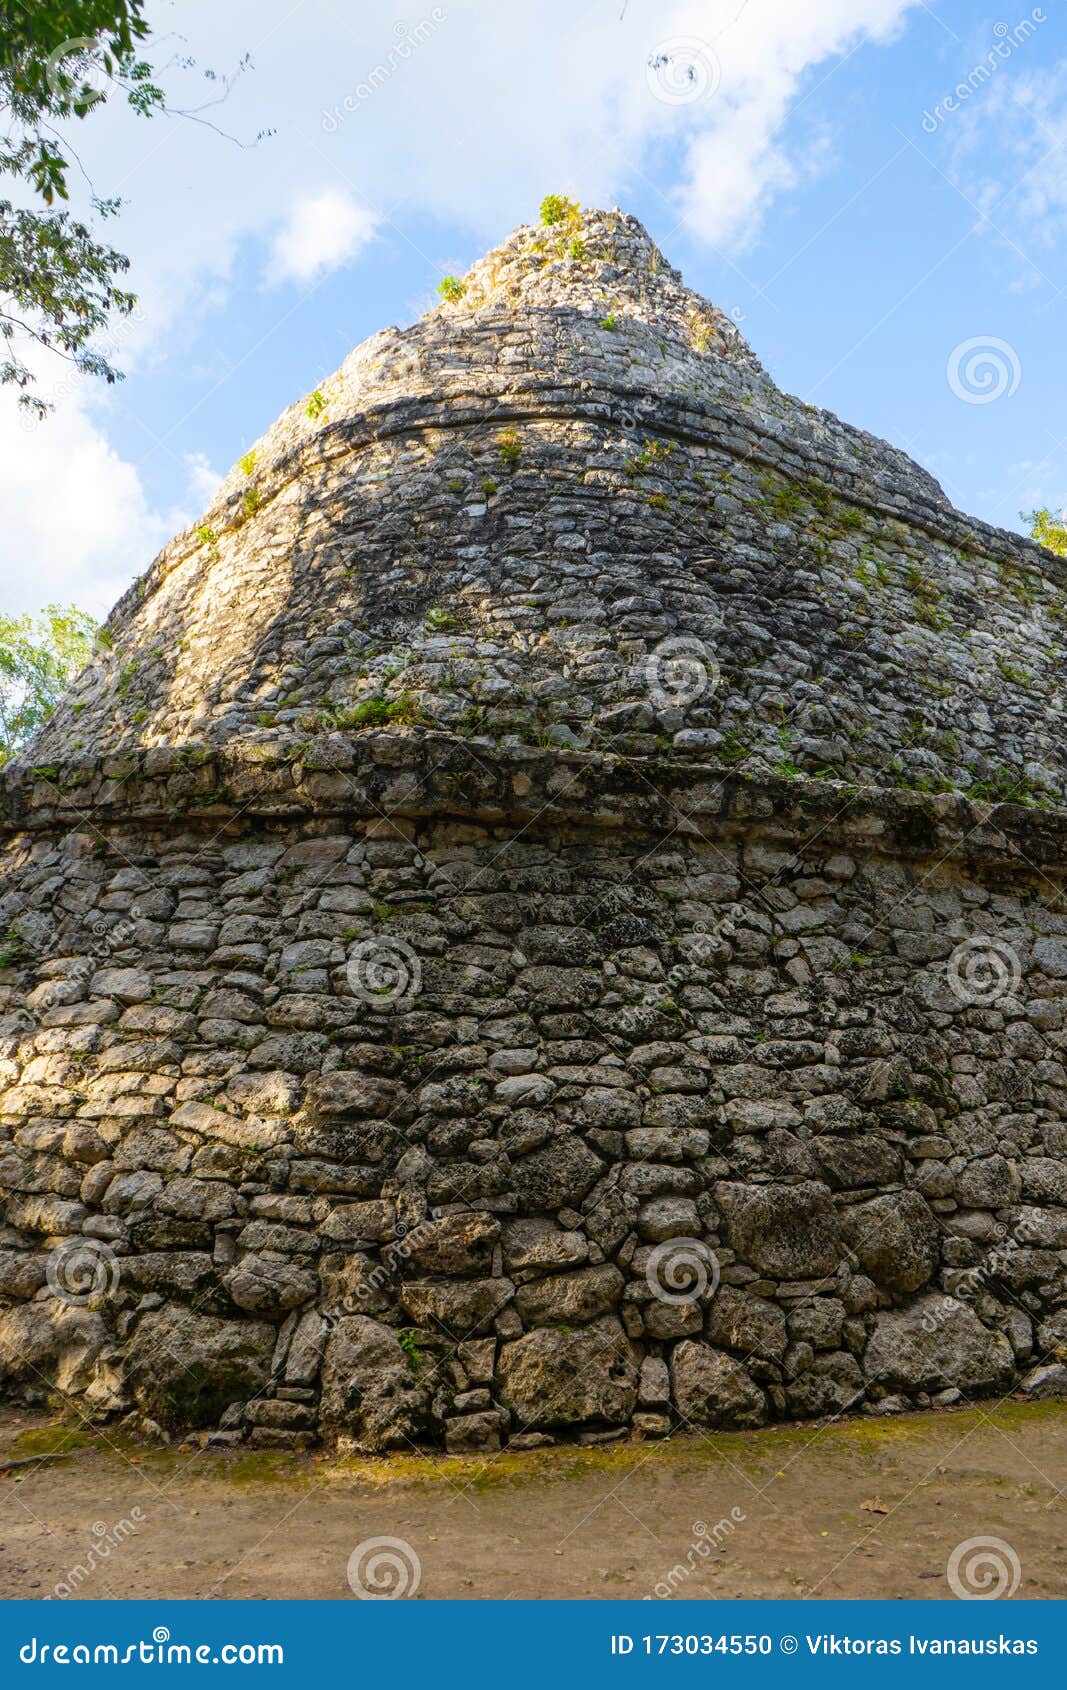 mayan observatory in coba observatorio astronomico de coba. ancient building in archeological site. travel photo. mexico. yucata